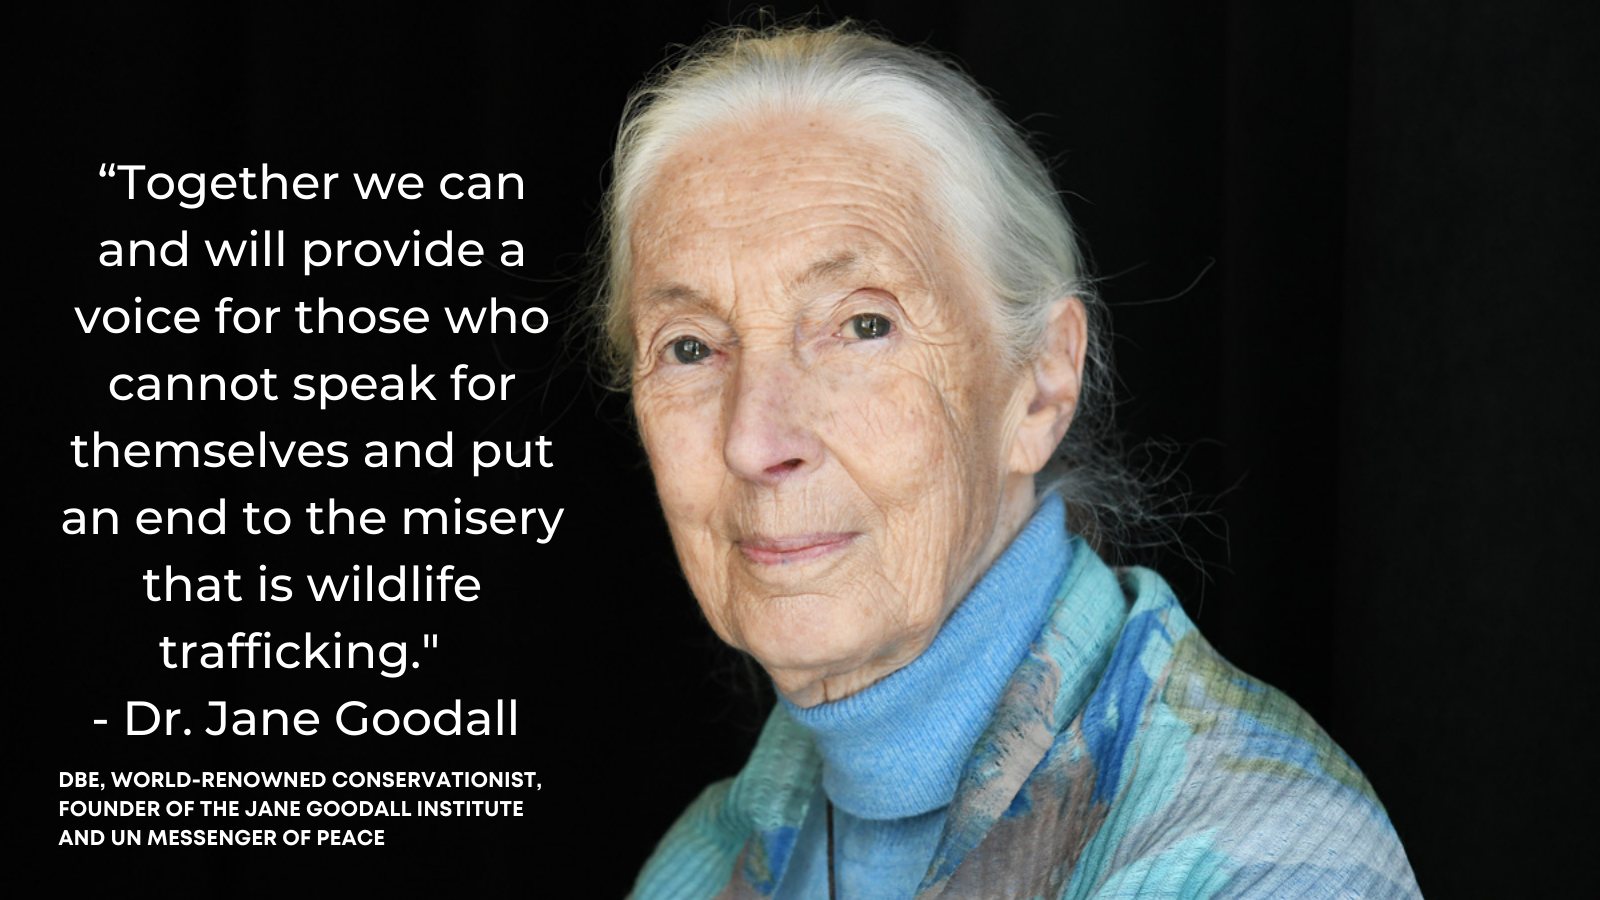 The Jane Goodall Act